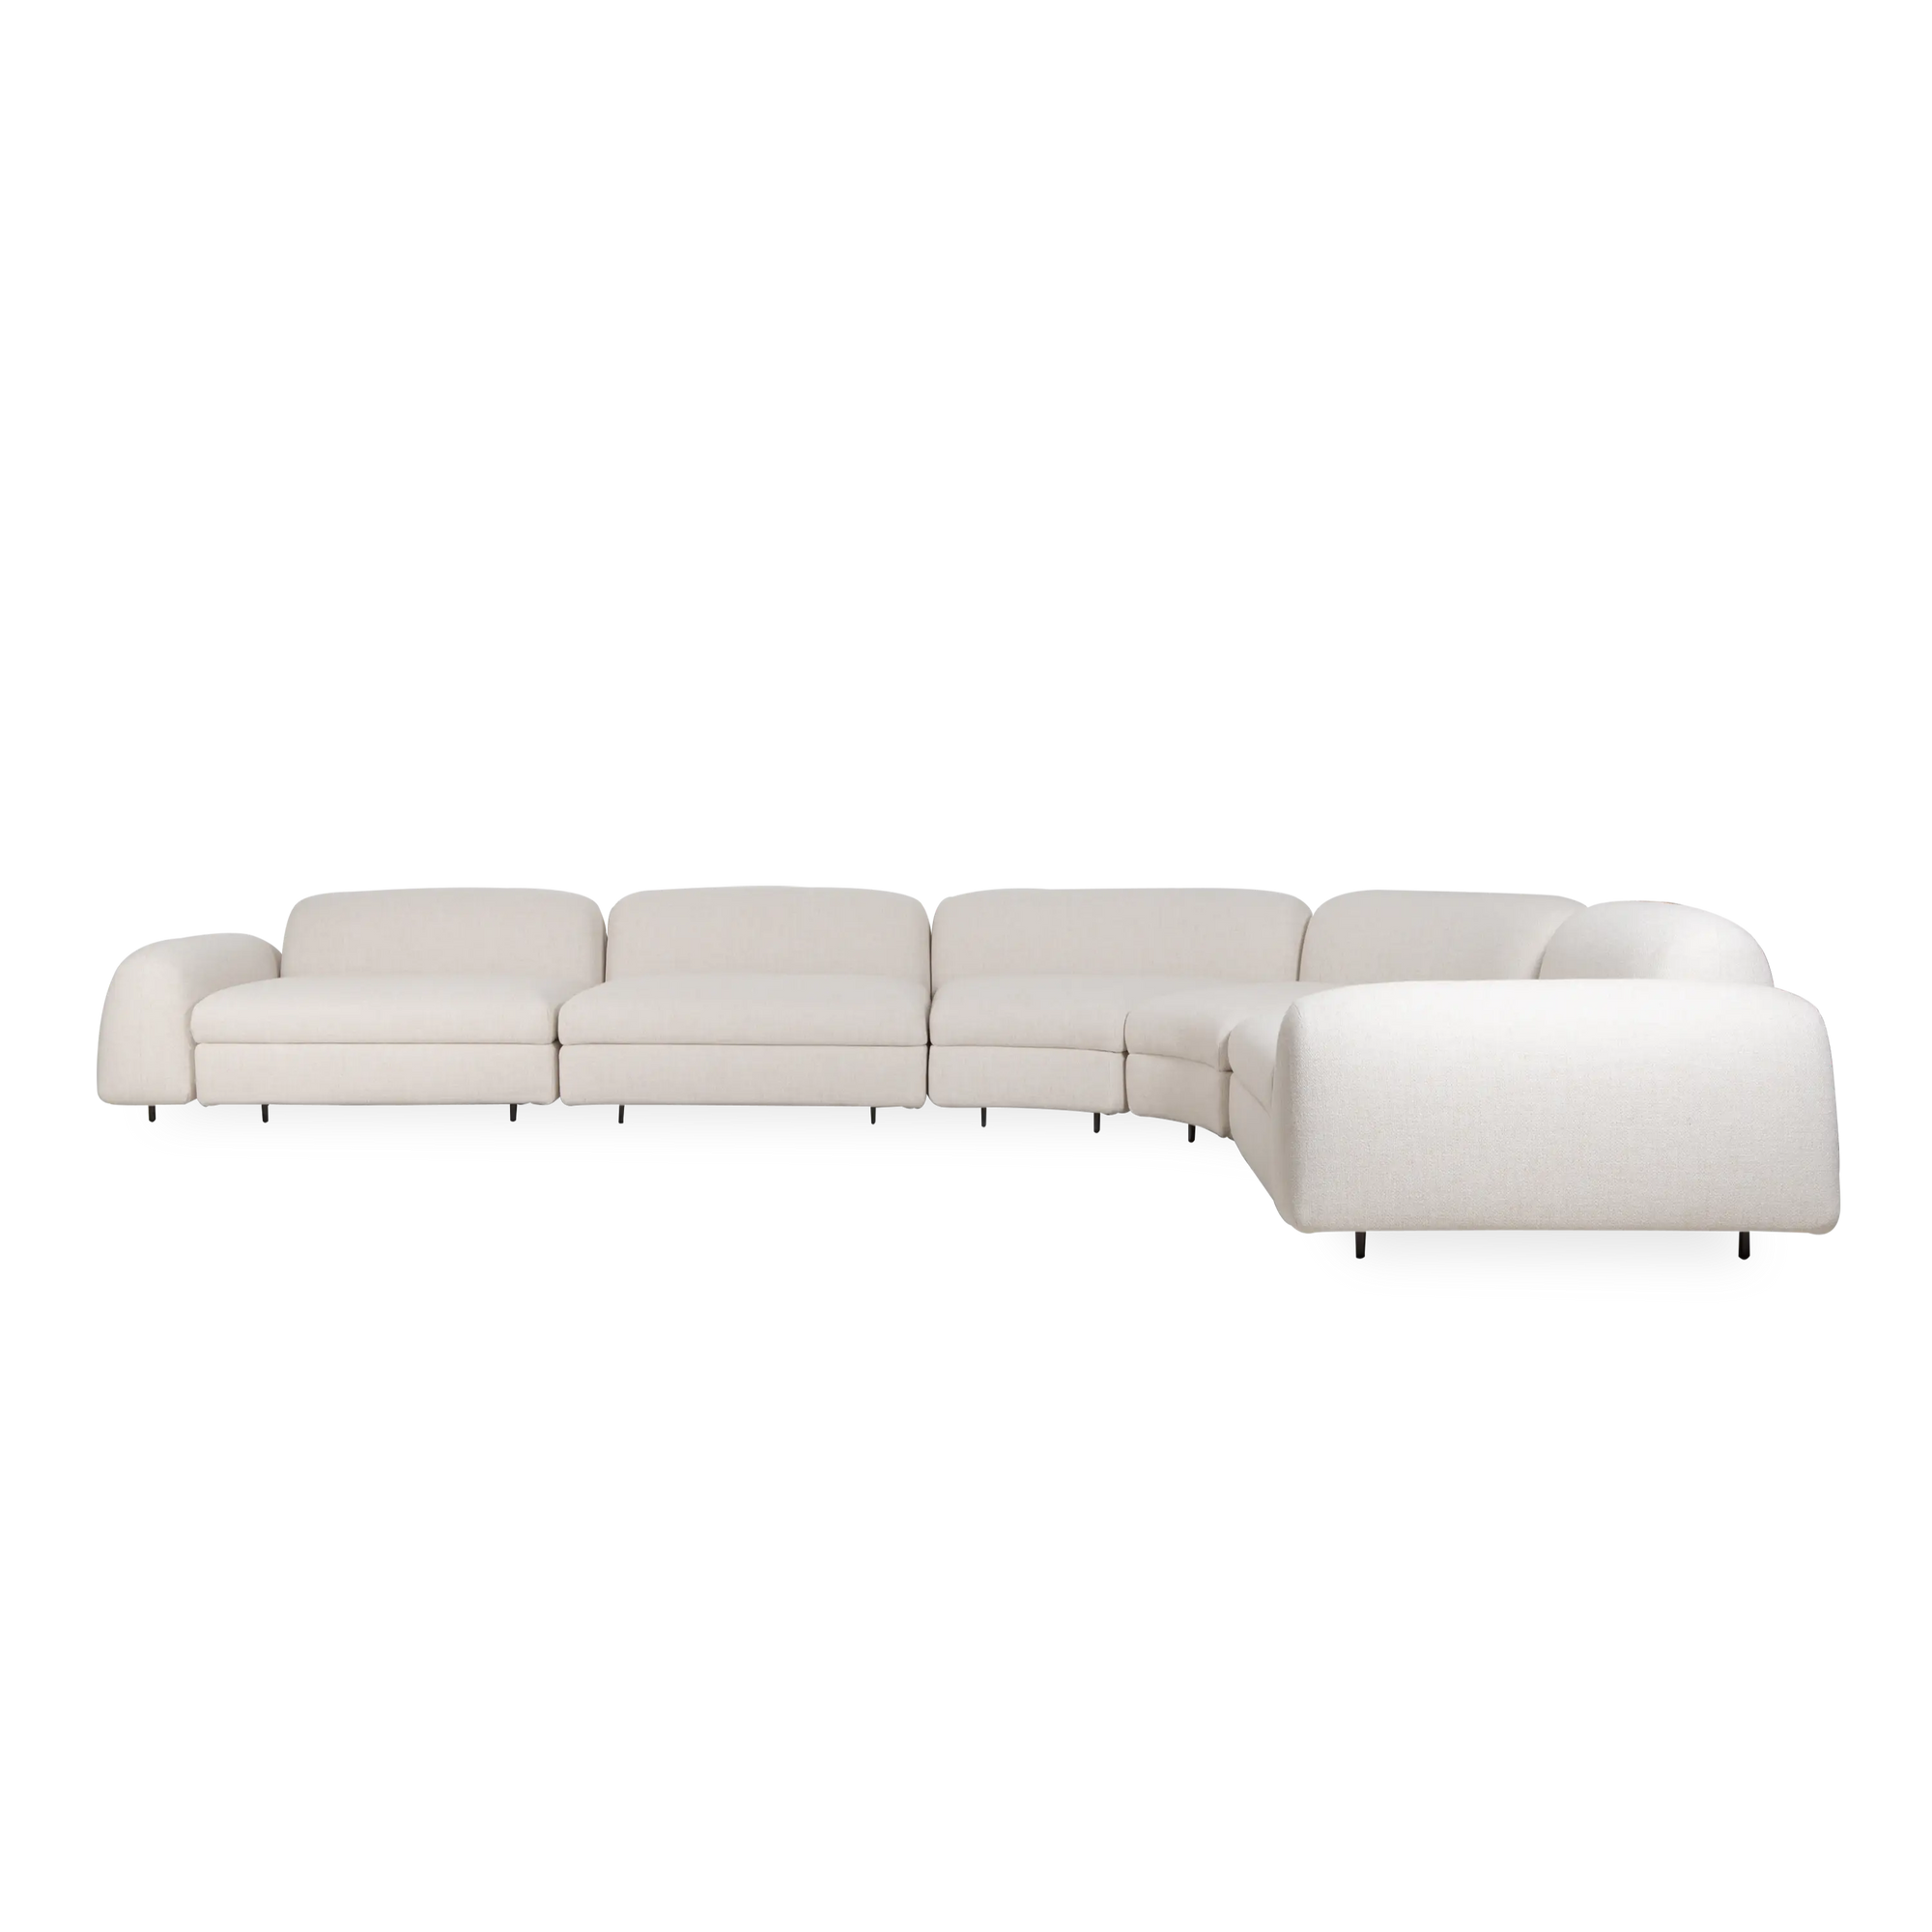 Exhibiting clean lines and geometric shapes, Claesson Koivisto Rune's Edo Sectional for arflex epitomizes their blend of modern aesthetics and functional design.